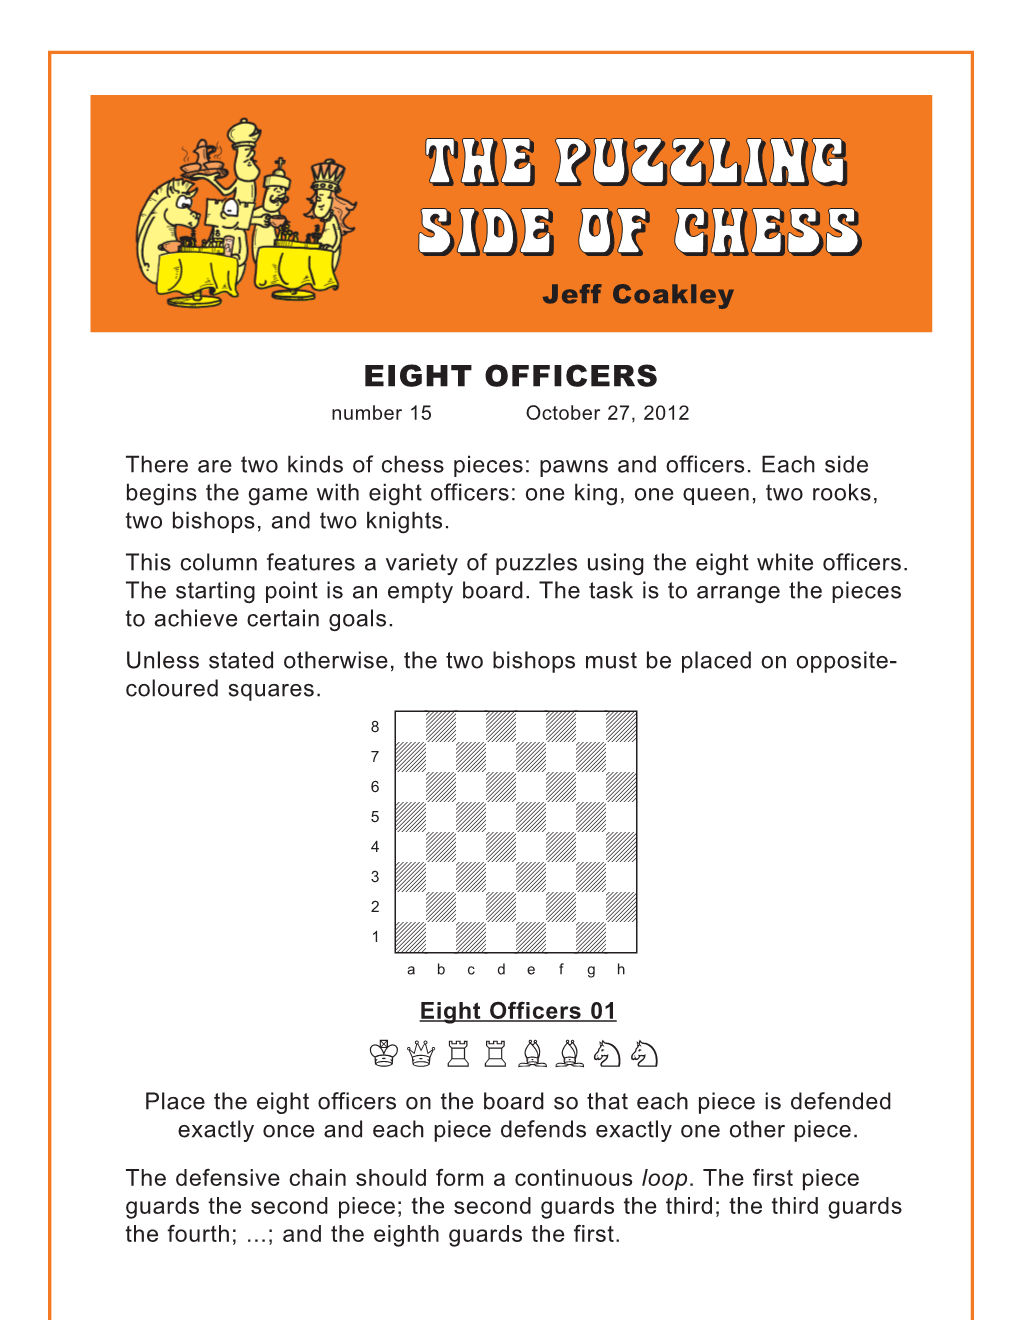 The Puzzling Side of Chess